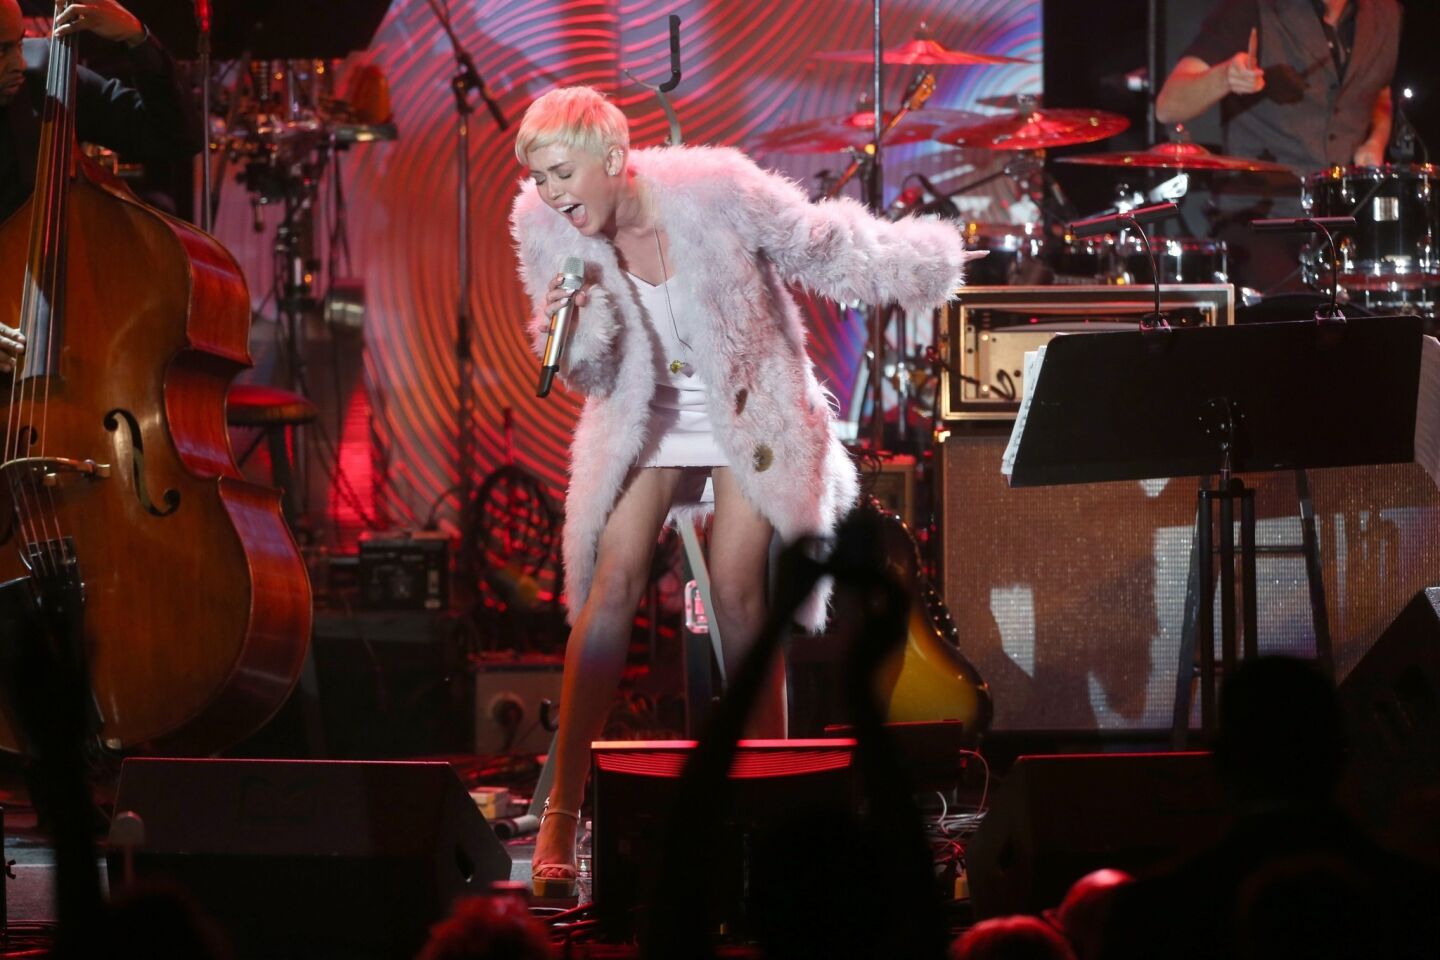 While Miley didn't pick up any 2014 Grammy nominations, she was invited to perform at Clive Davis' Pre-Grammy Gala. She wore a pink fur coat and donned a simple blond pixie cut, yet her performance was anything but subtle. She offered up a conservative take of "Jolene" by Dolly Parton in her three-song set.